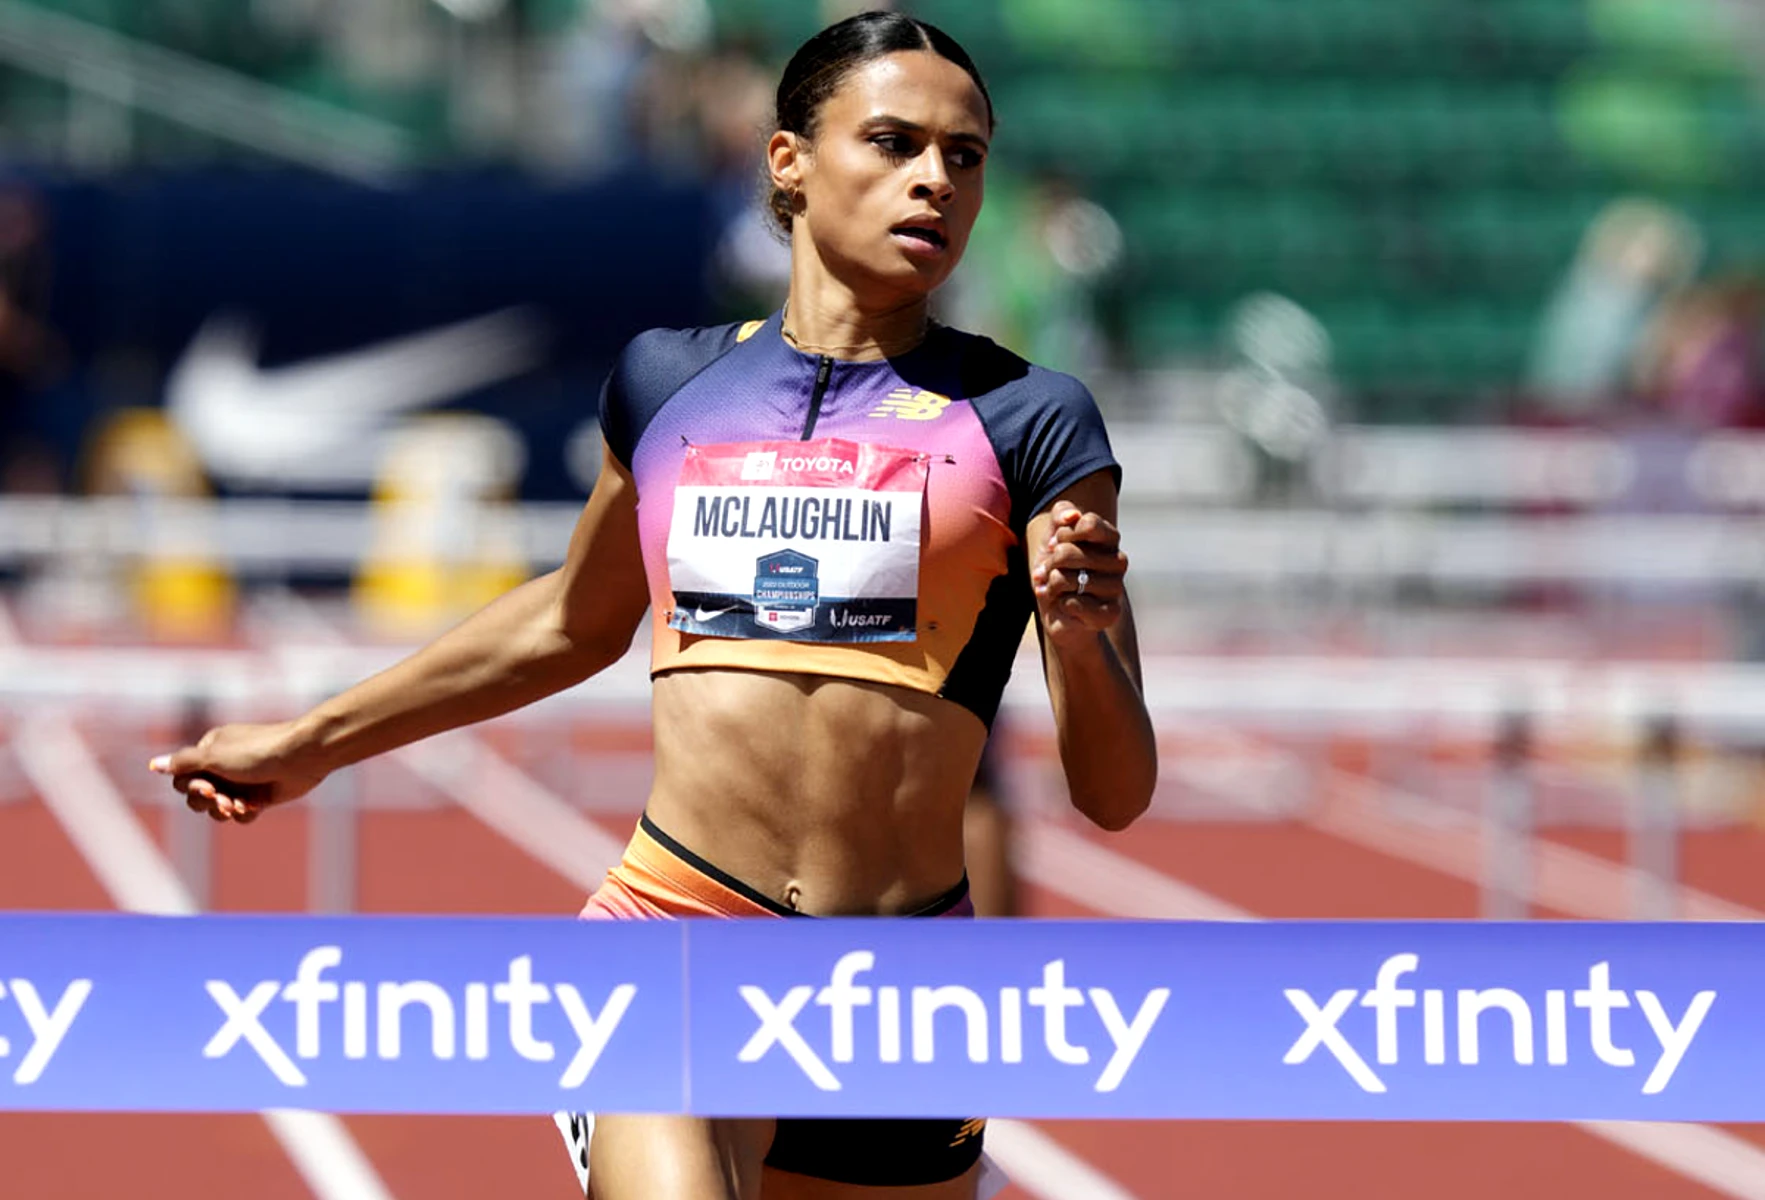 Sydney McLaughlin-Levrone at the USATF Outdoor Championships 2022